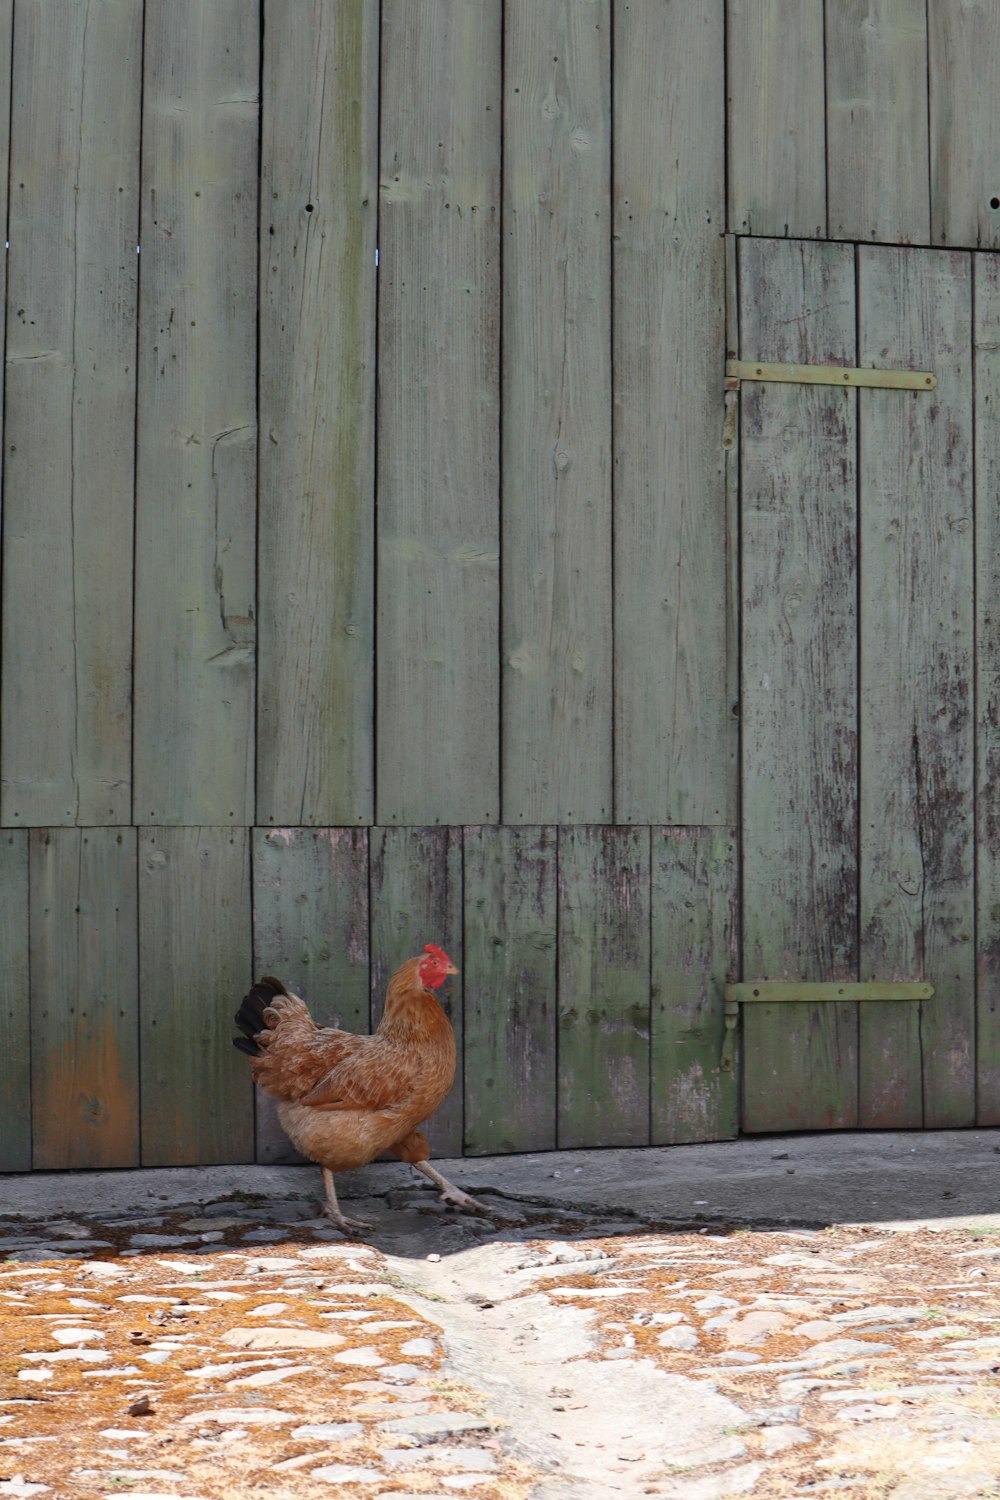 a brown chicken standing next to a wooden building